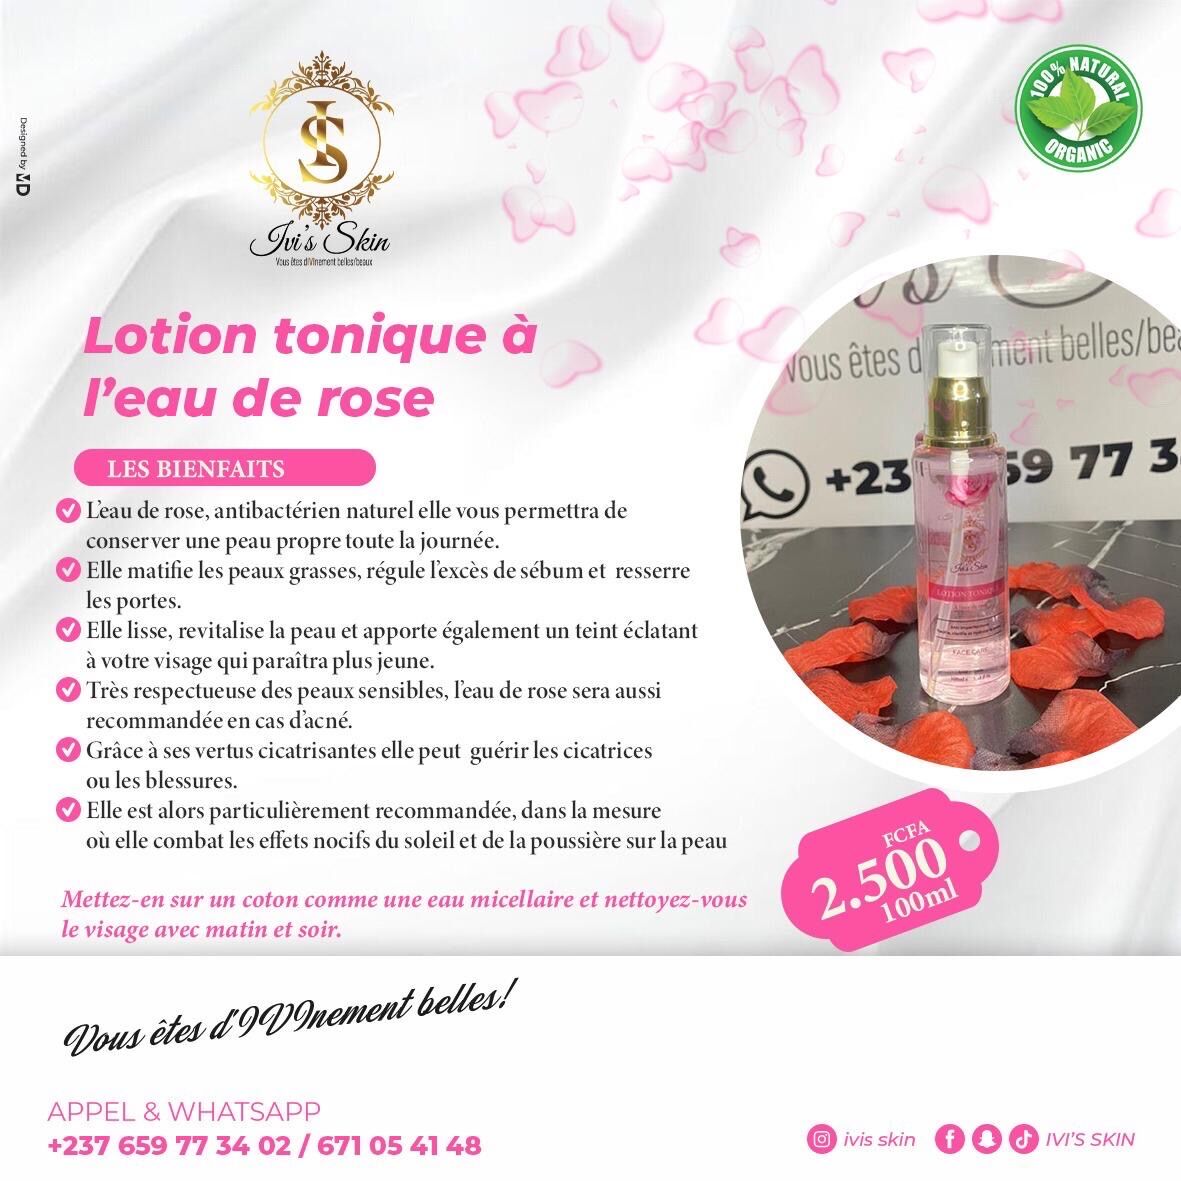 Tonic lotion with rose water